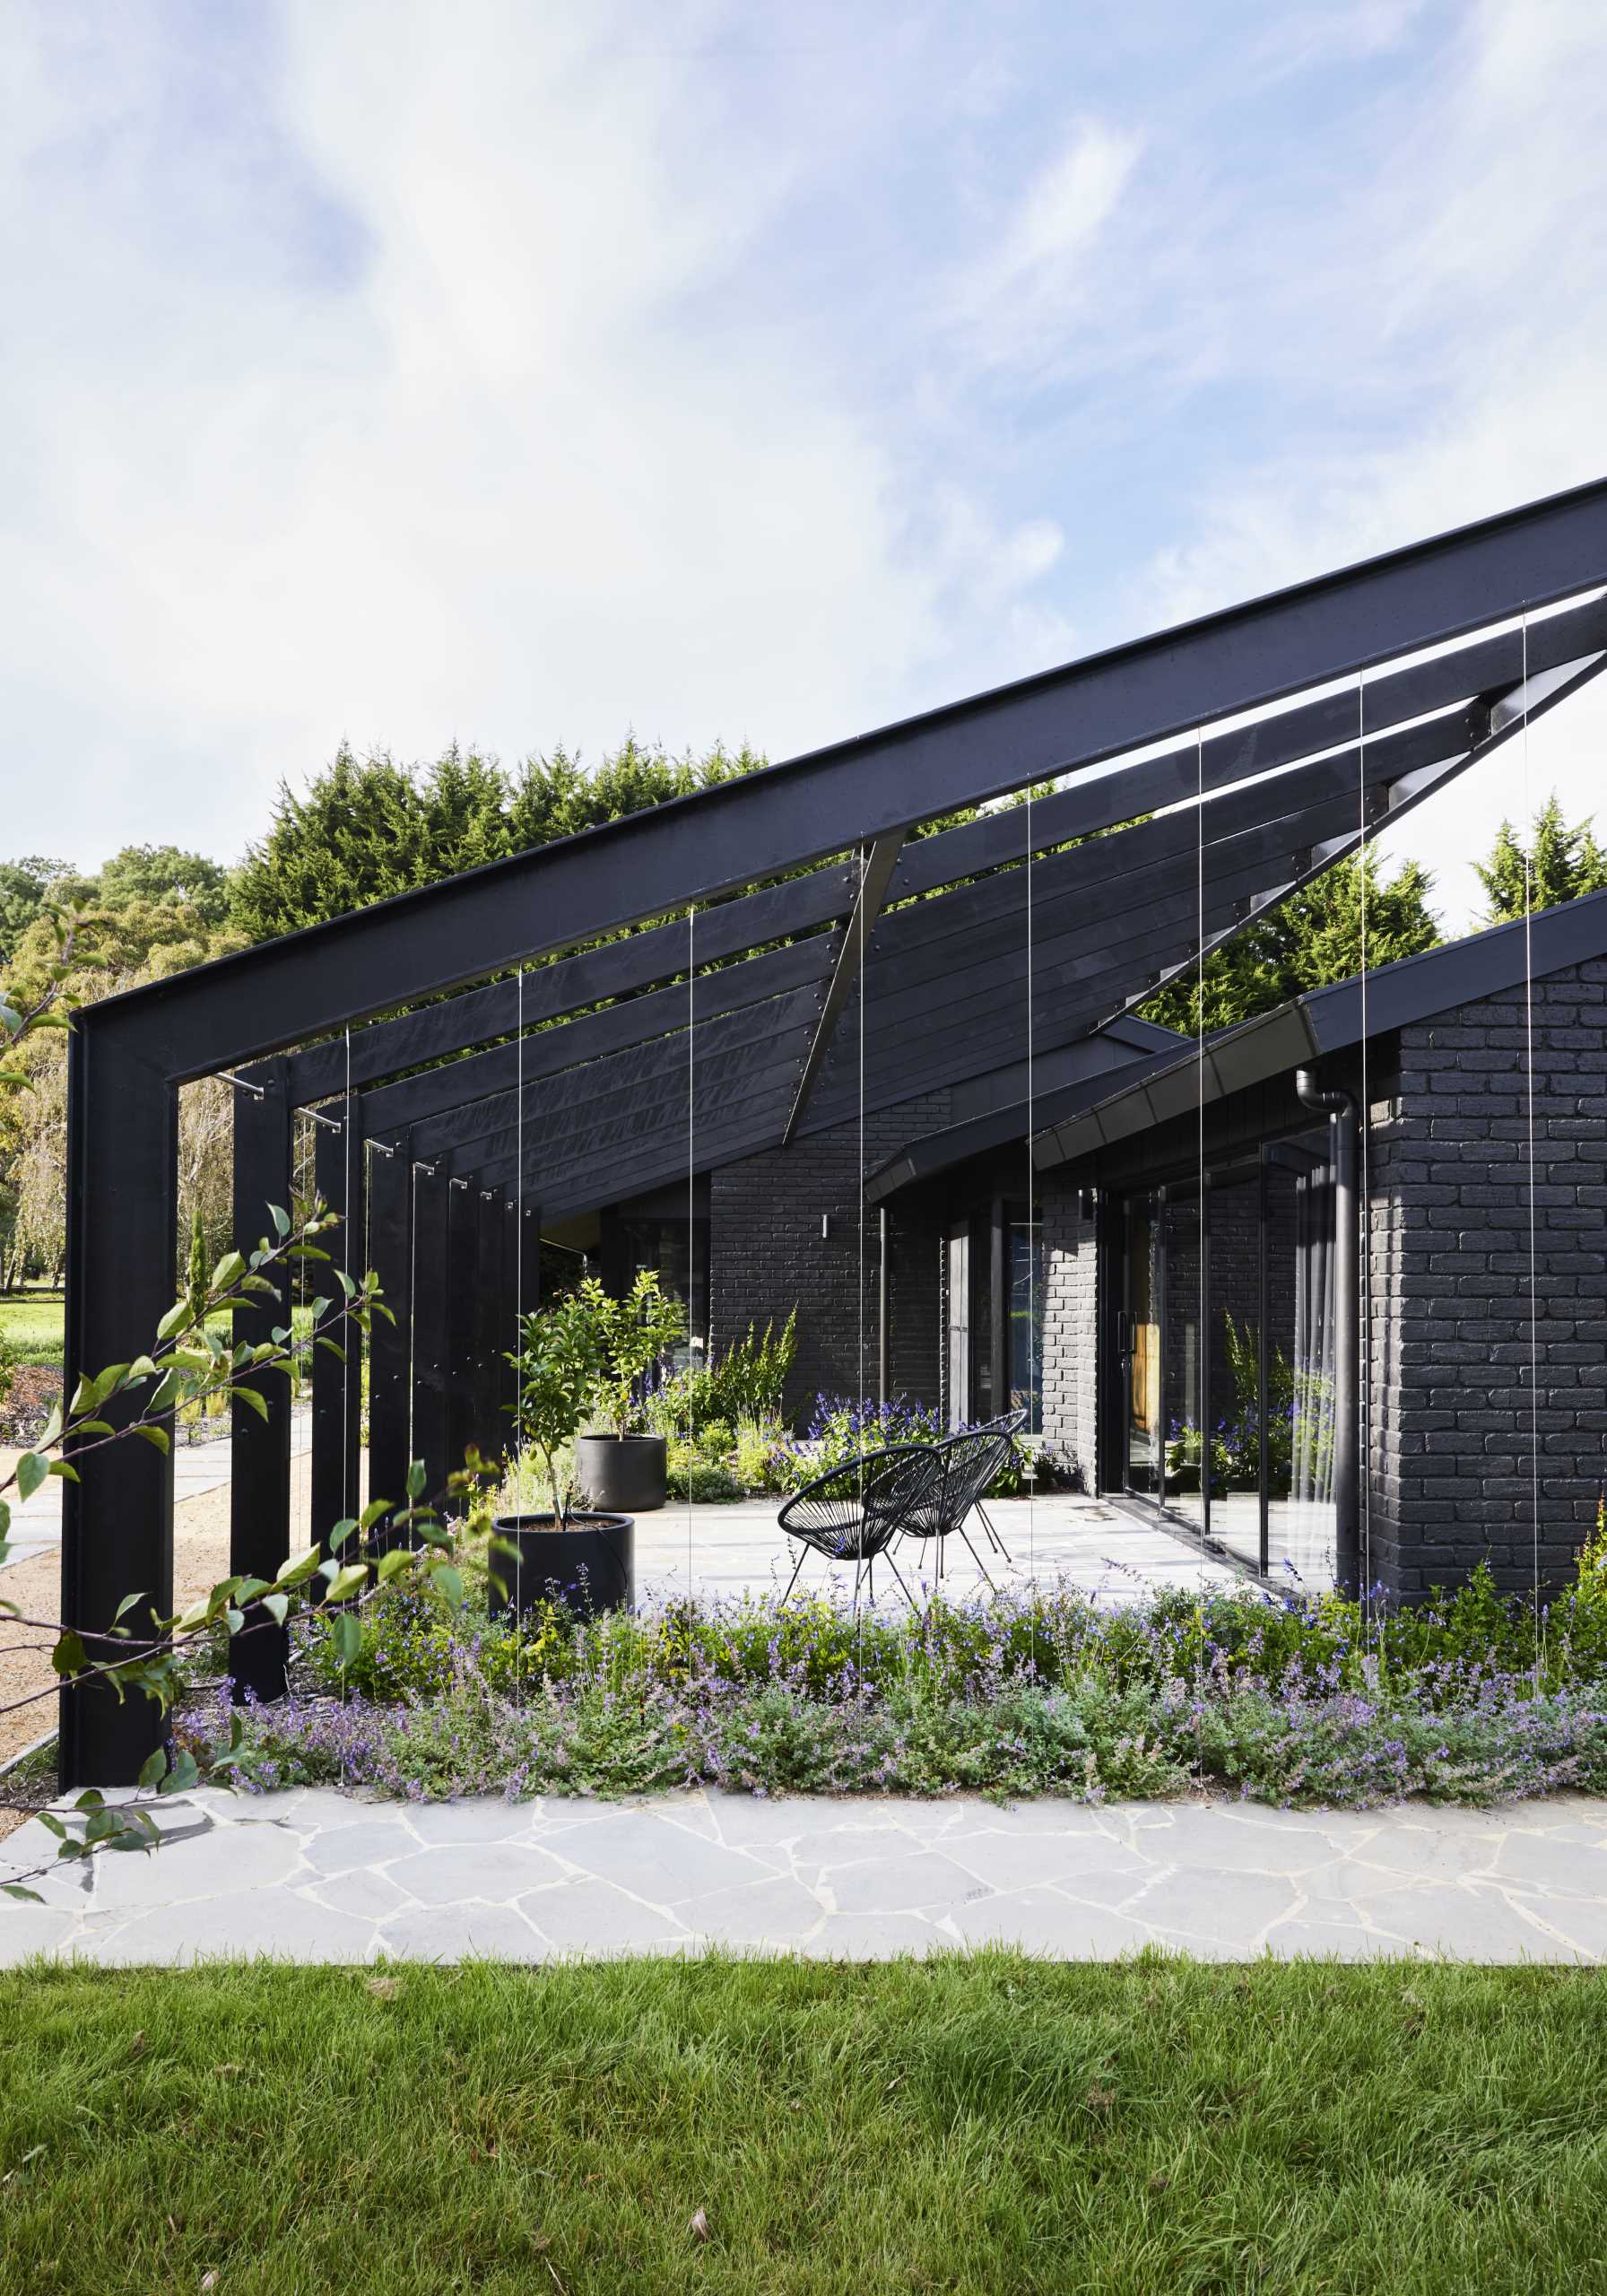 A modern farmhouse with a courtyard that will become enclosed with plants over time.